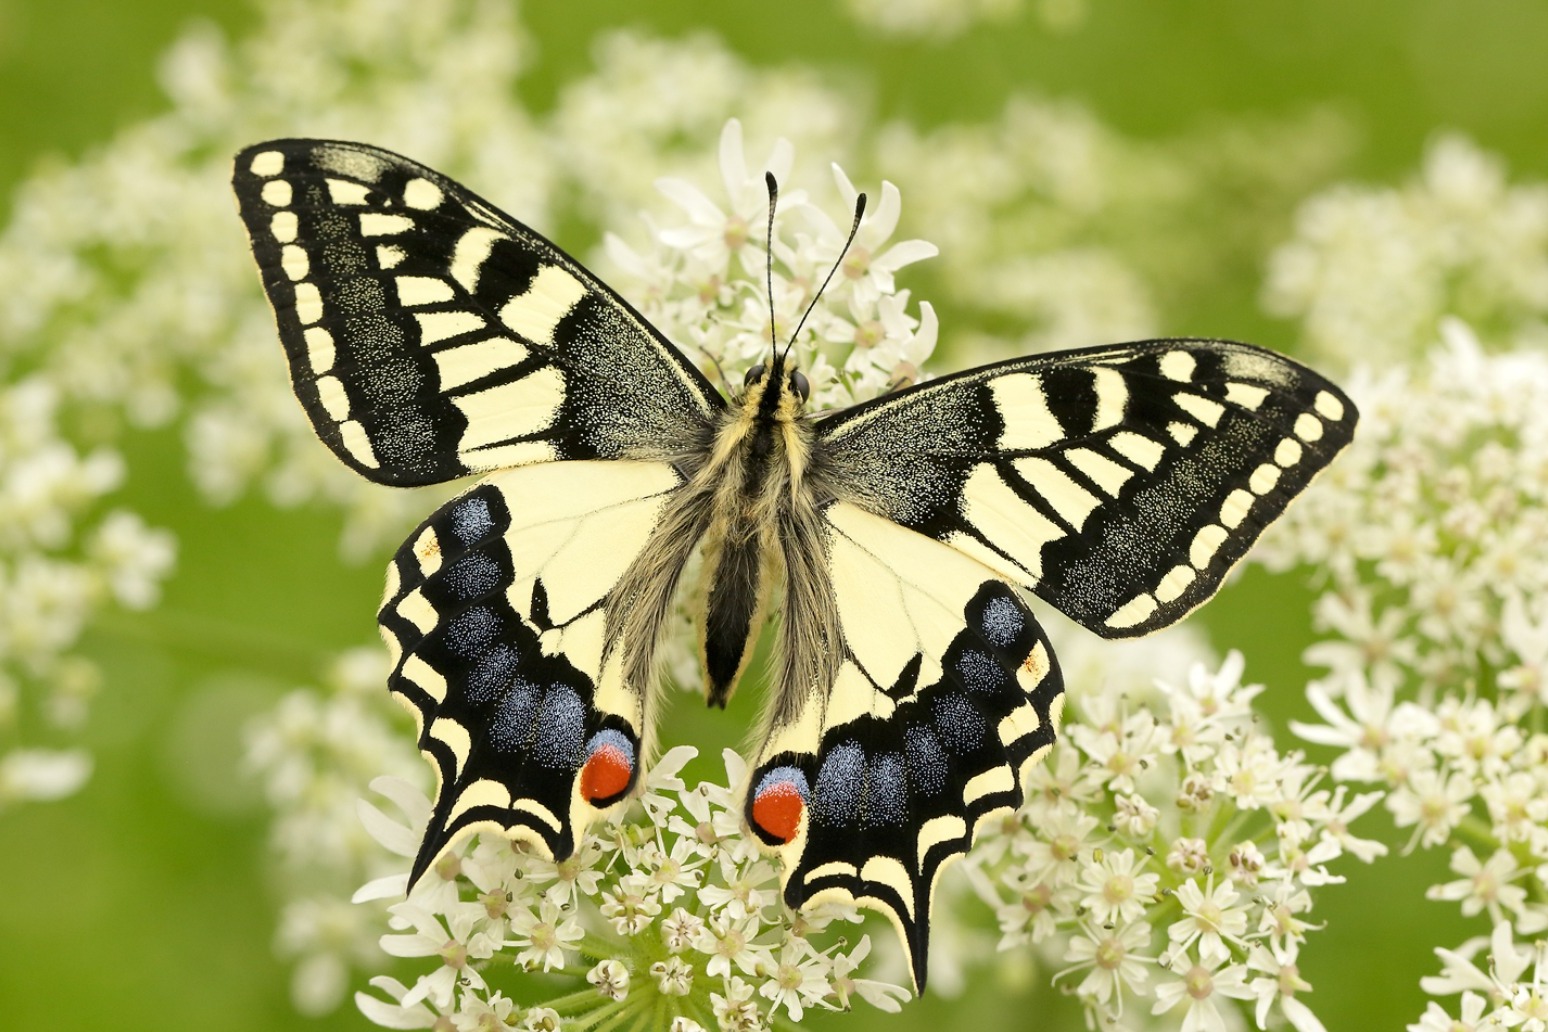 Two-fifths of British butterflies threatened with extinction, analysis shows 